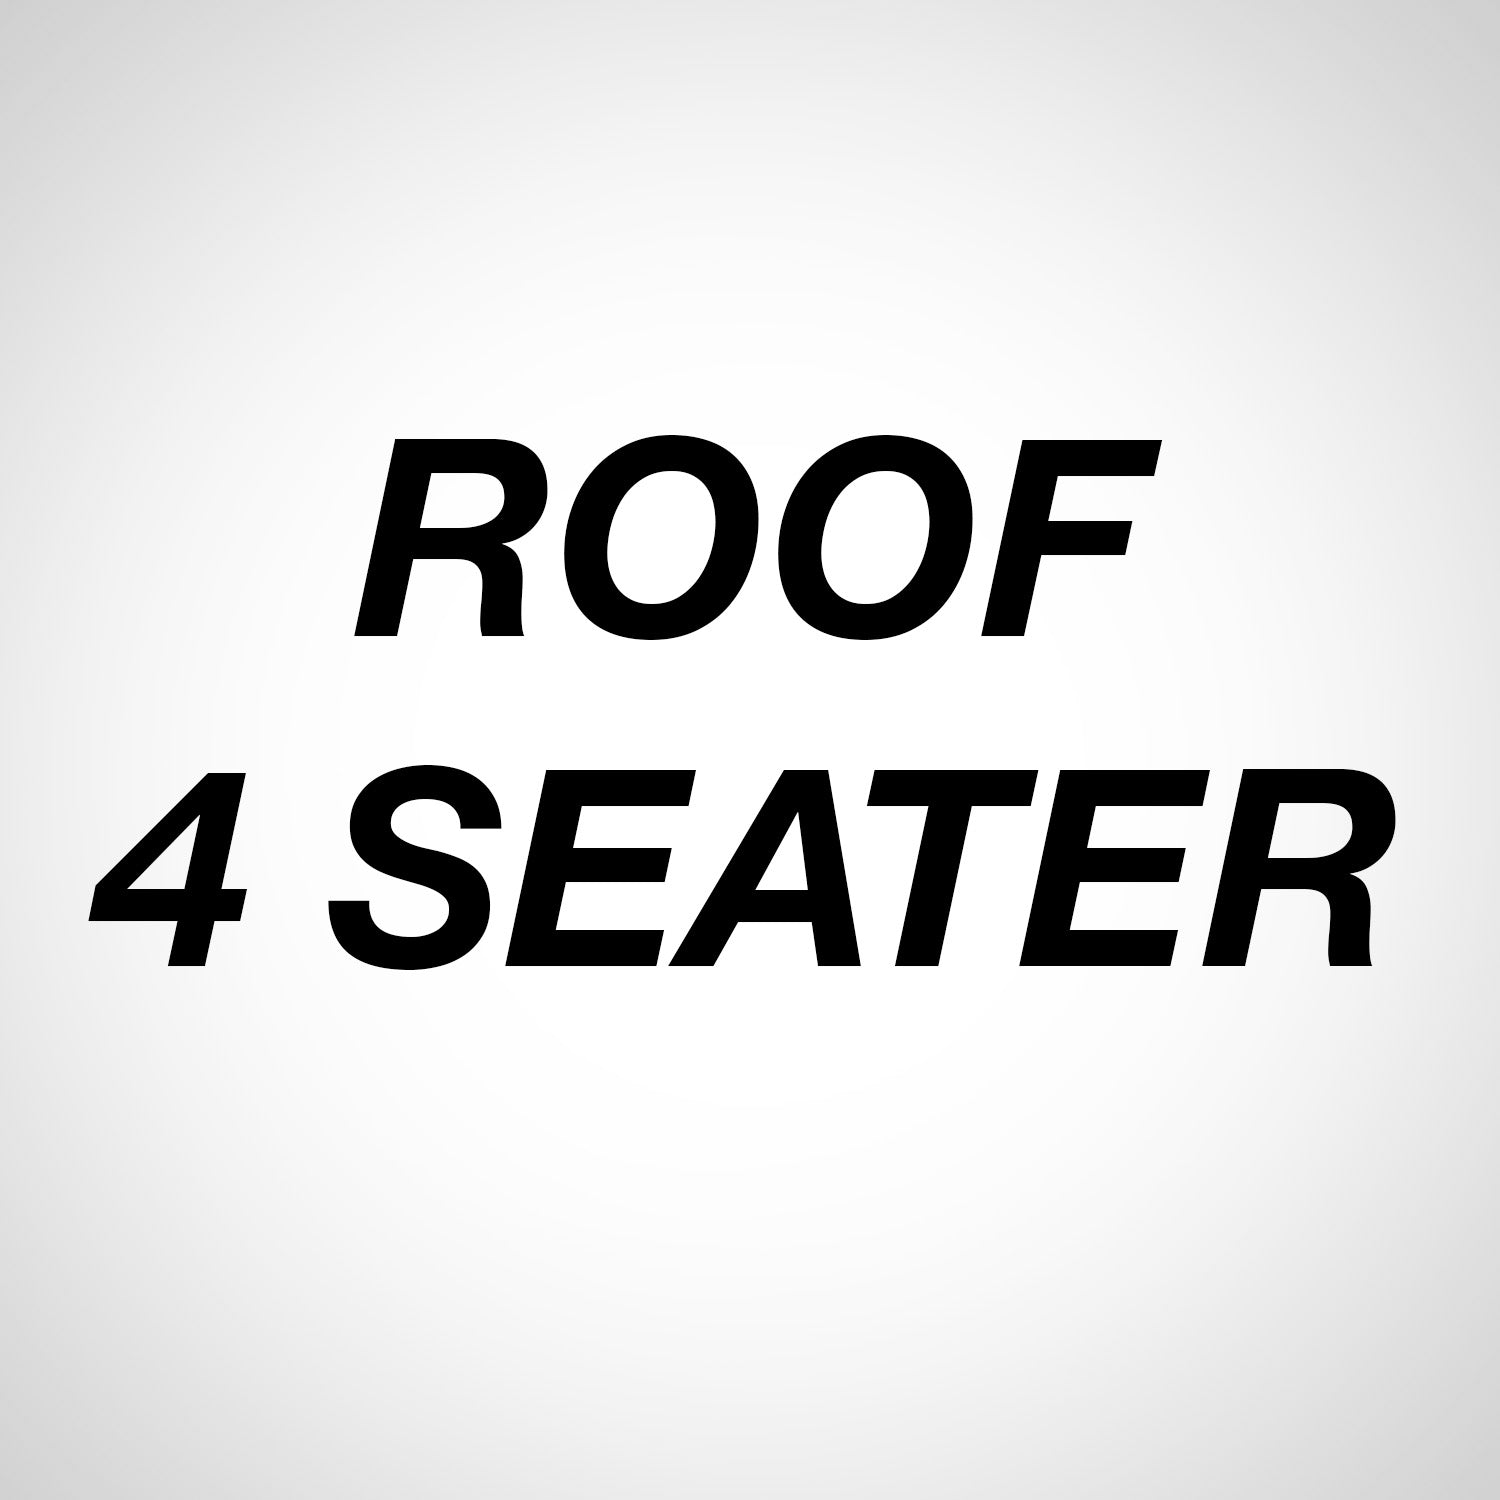 Roof 4seater